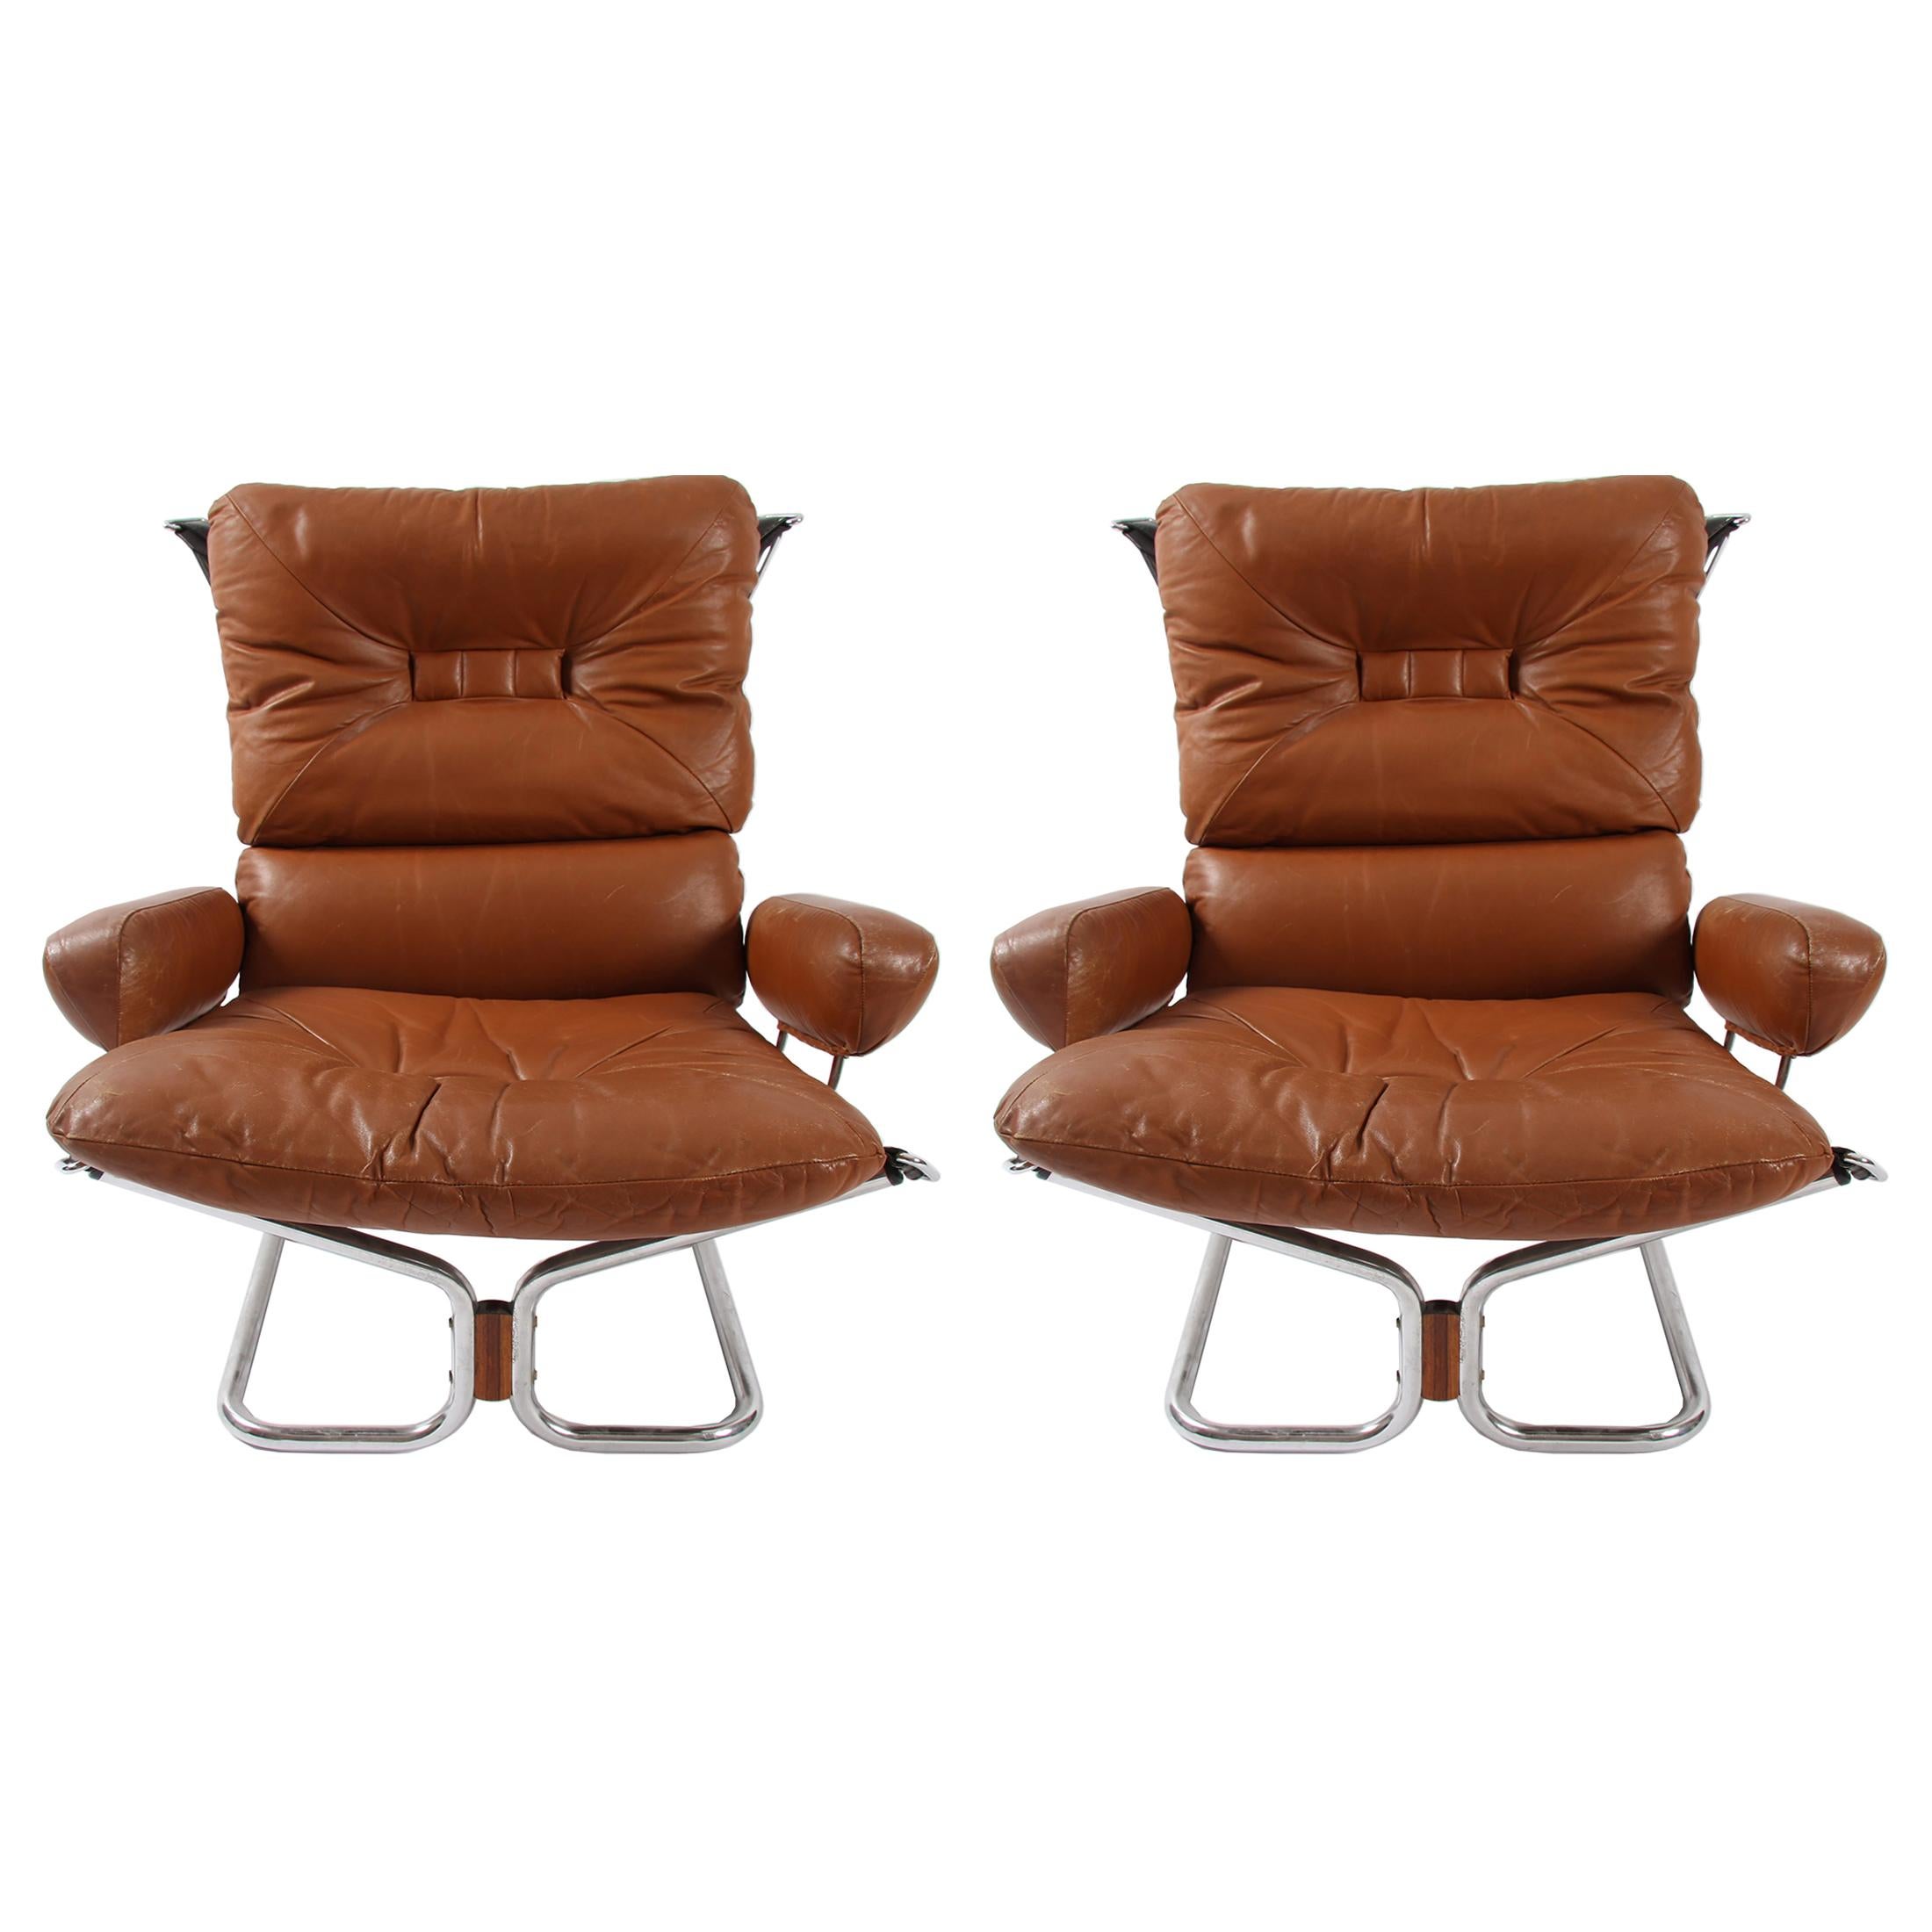 Pair of Relling Chairs For Sale